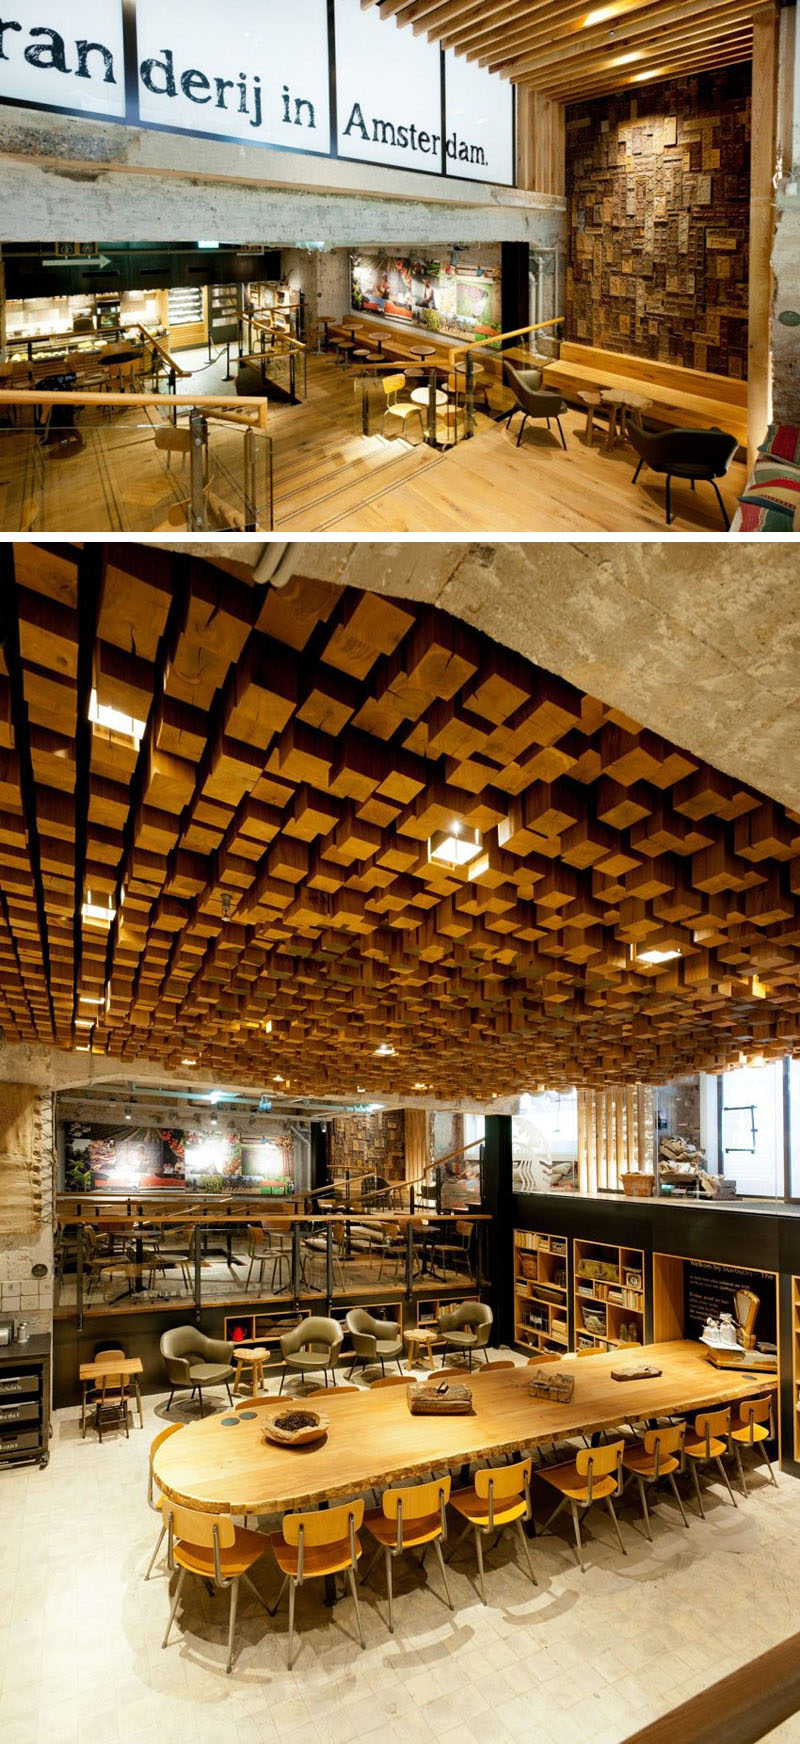 11 Starbucks Coffee Shops From Around The World // By including many Dutch elements in the design of this location and keeping original elements of the structure - like the marble floor - this Starbucks concept store in Amsterdam takes away some of the American feel and makes the store feel a bit more like a local coffee shop.